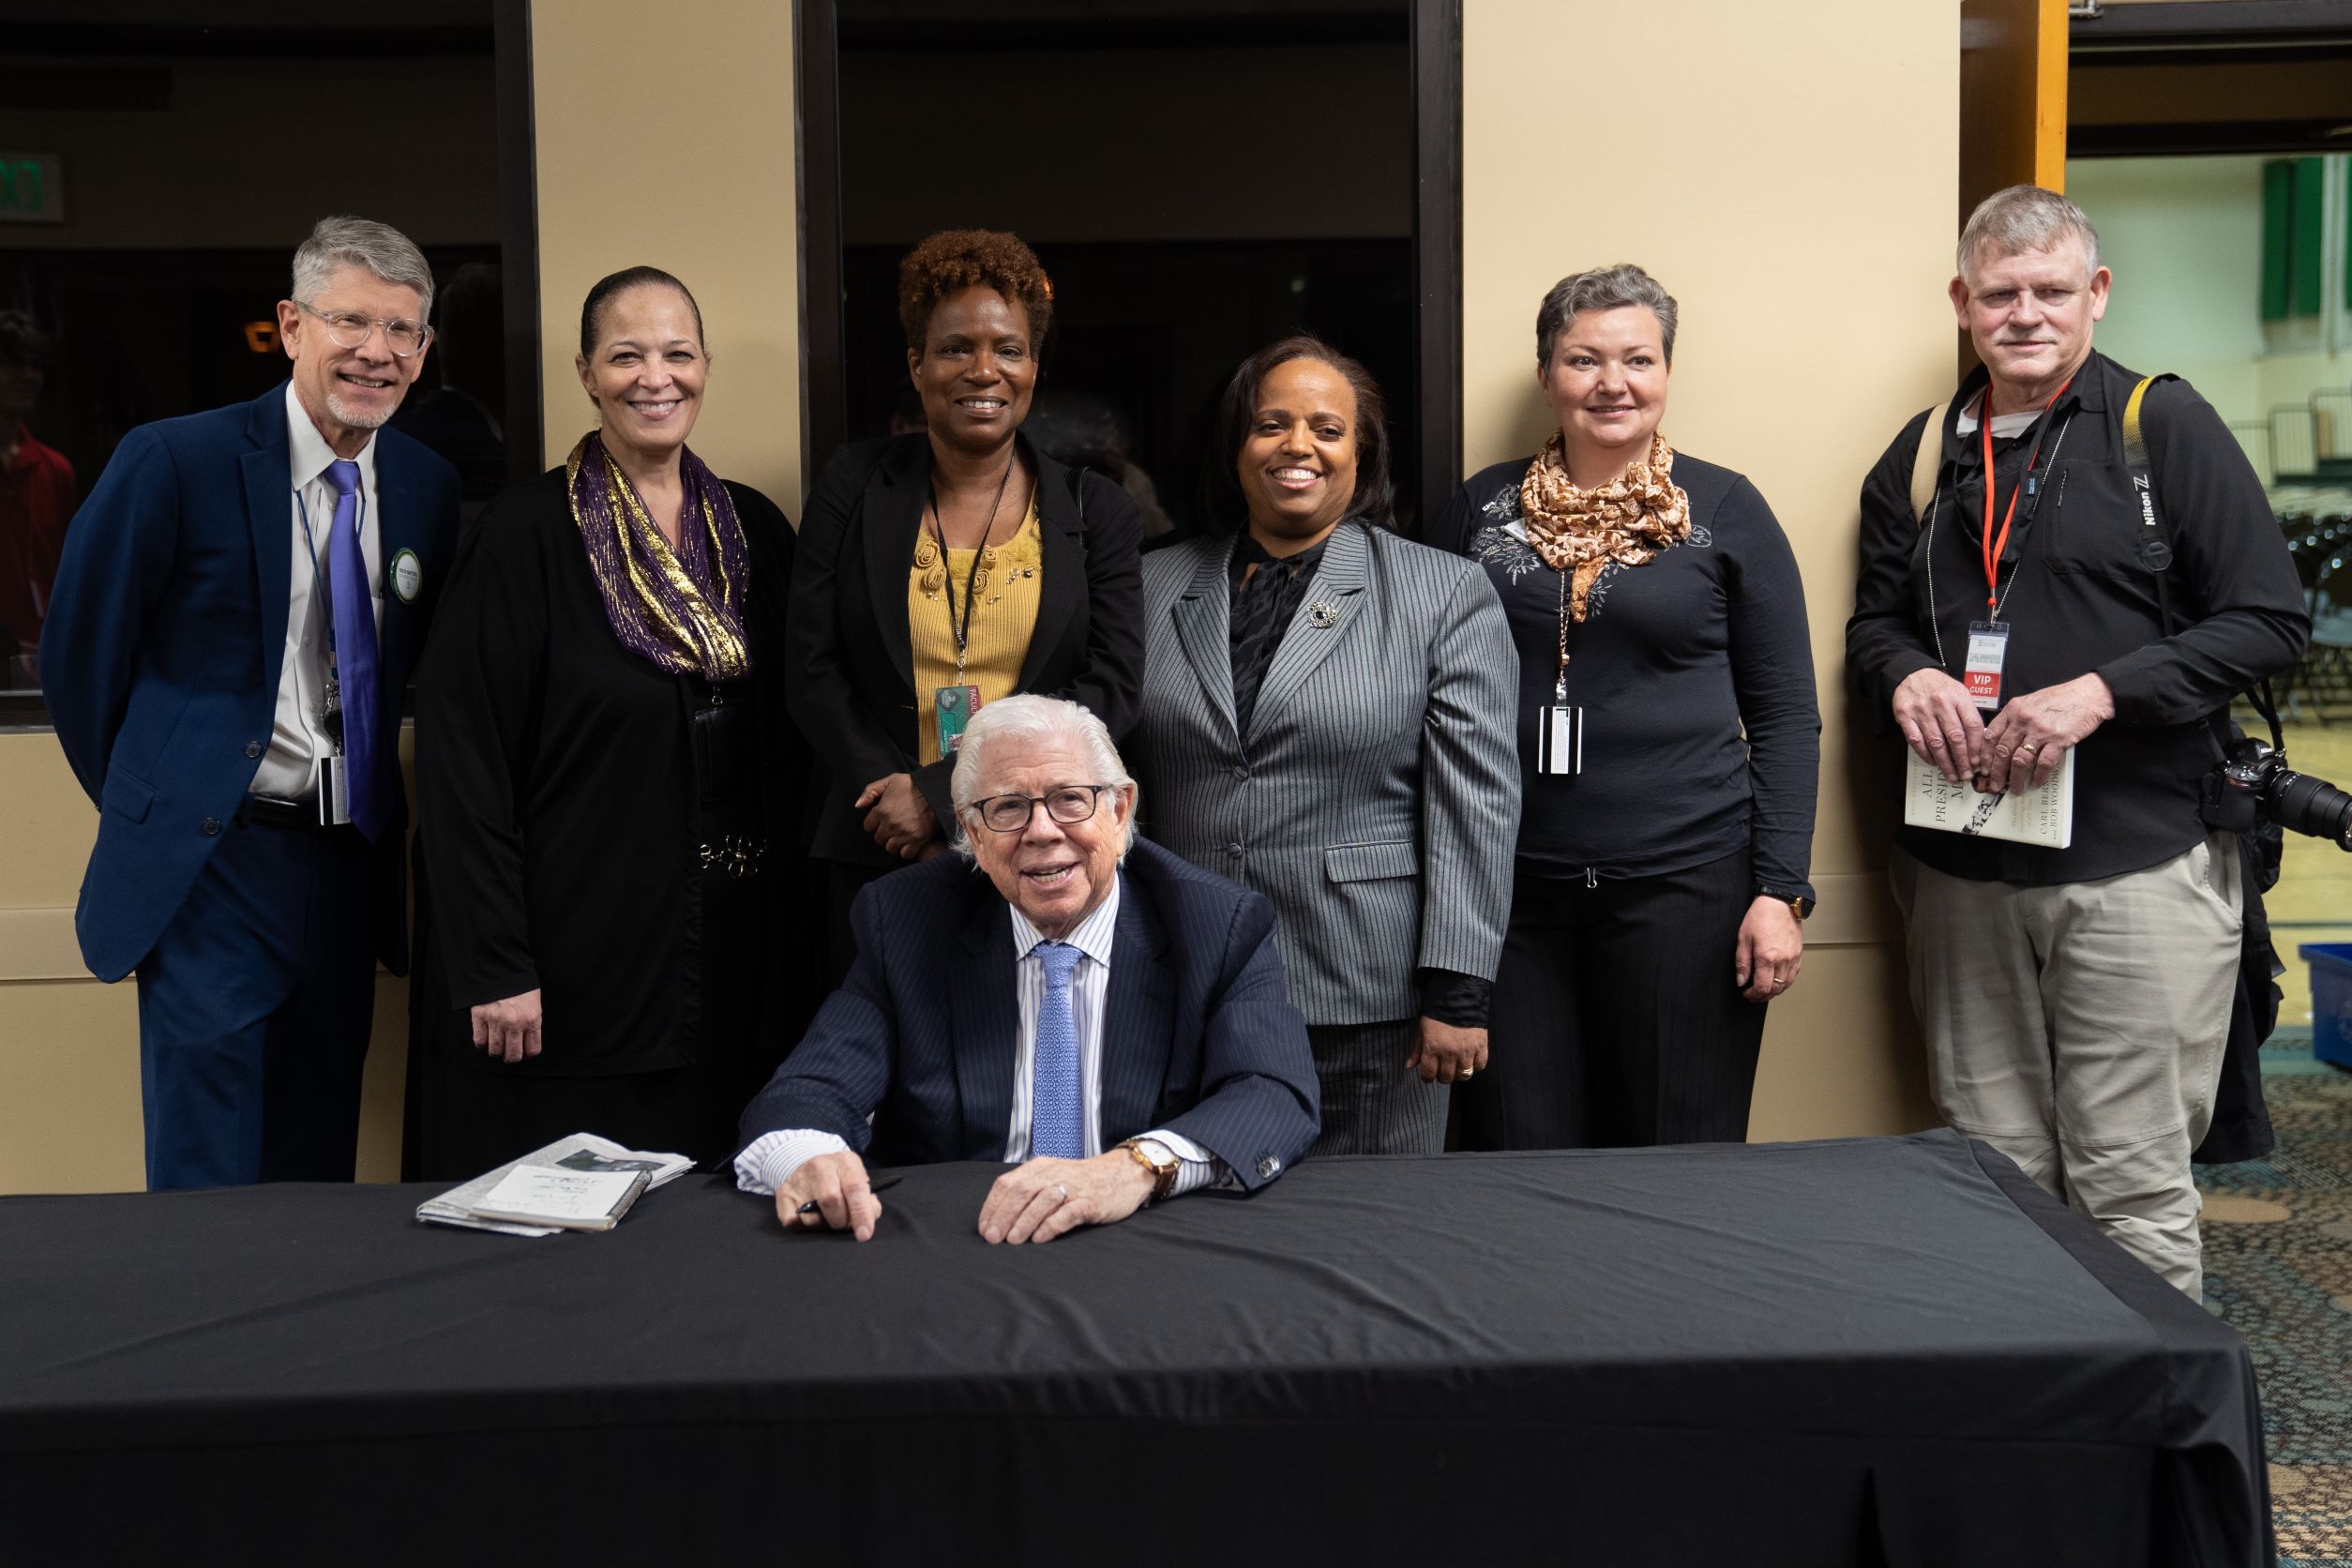 The School of Journalism and Communication welcomes Carl Bernstein to Southern for the inaugural presentation in the R. Lynn Saul Lecture Series